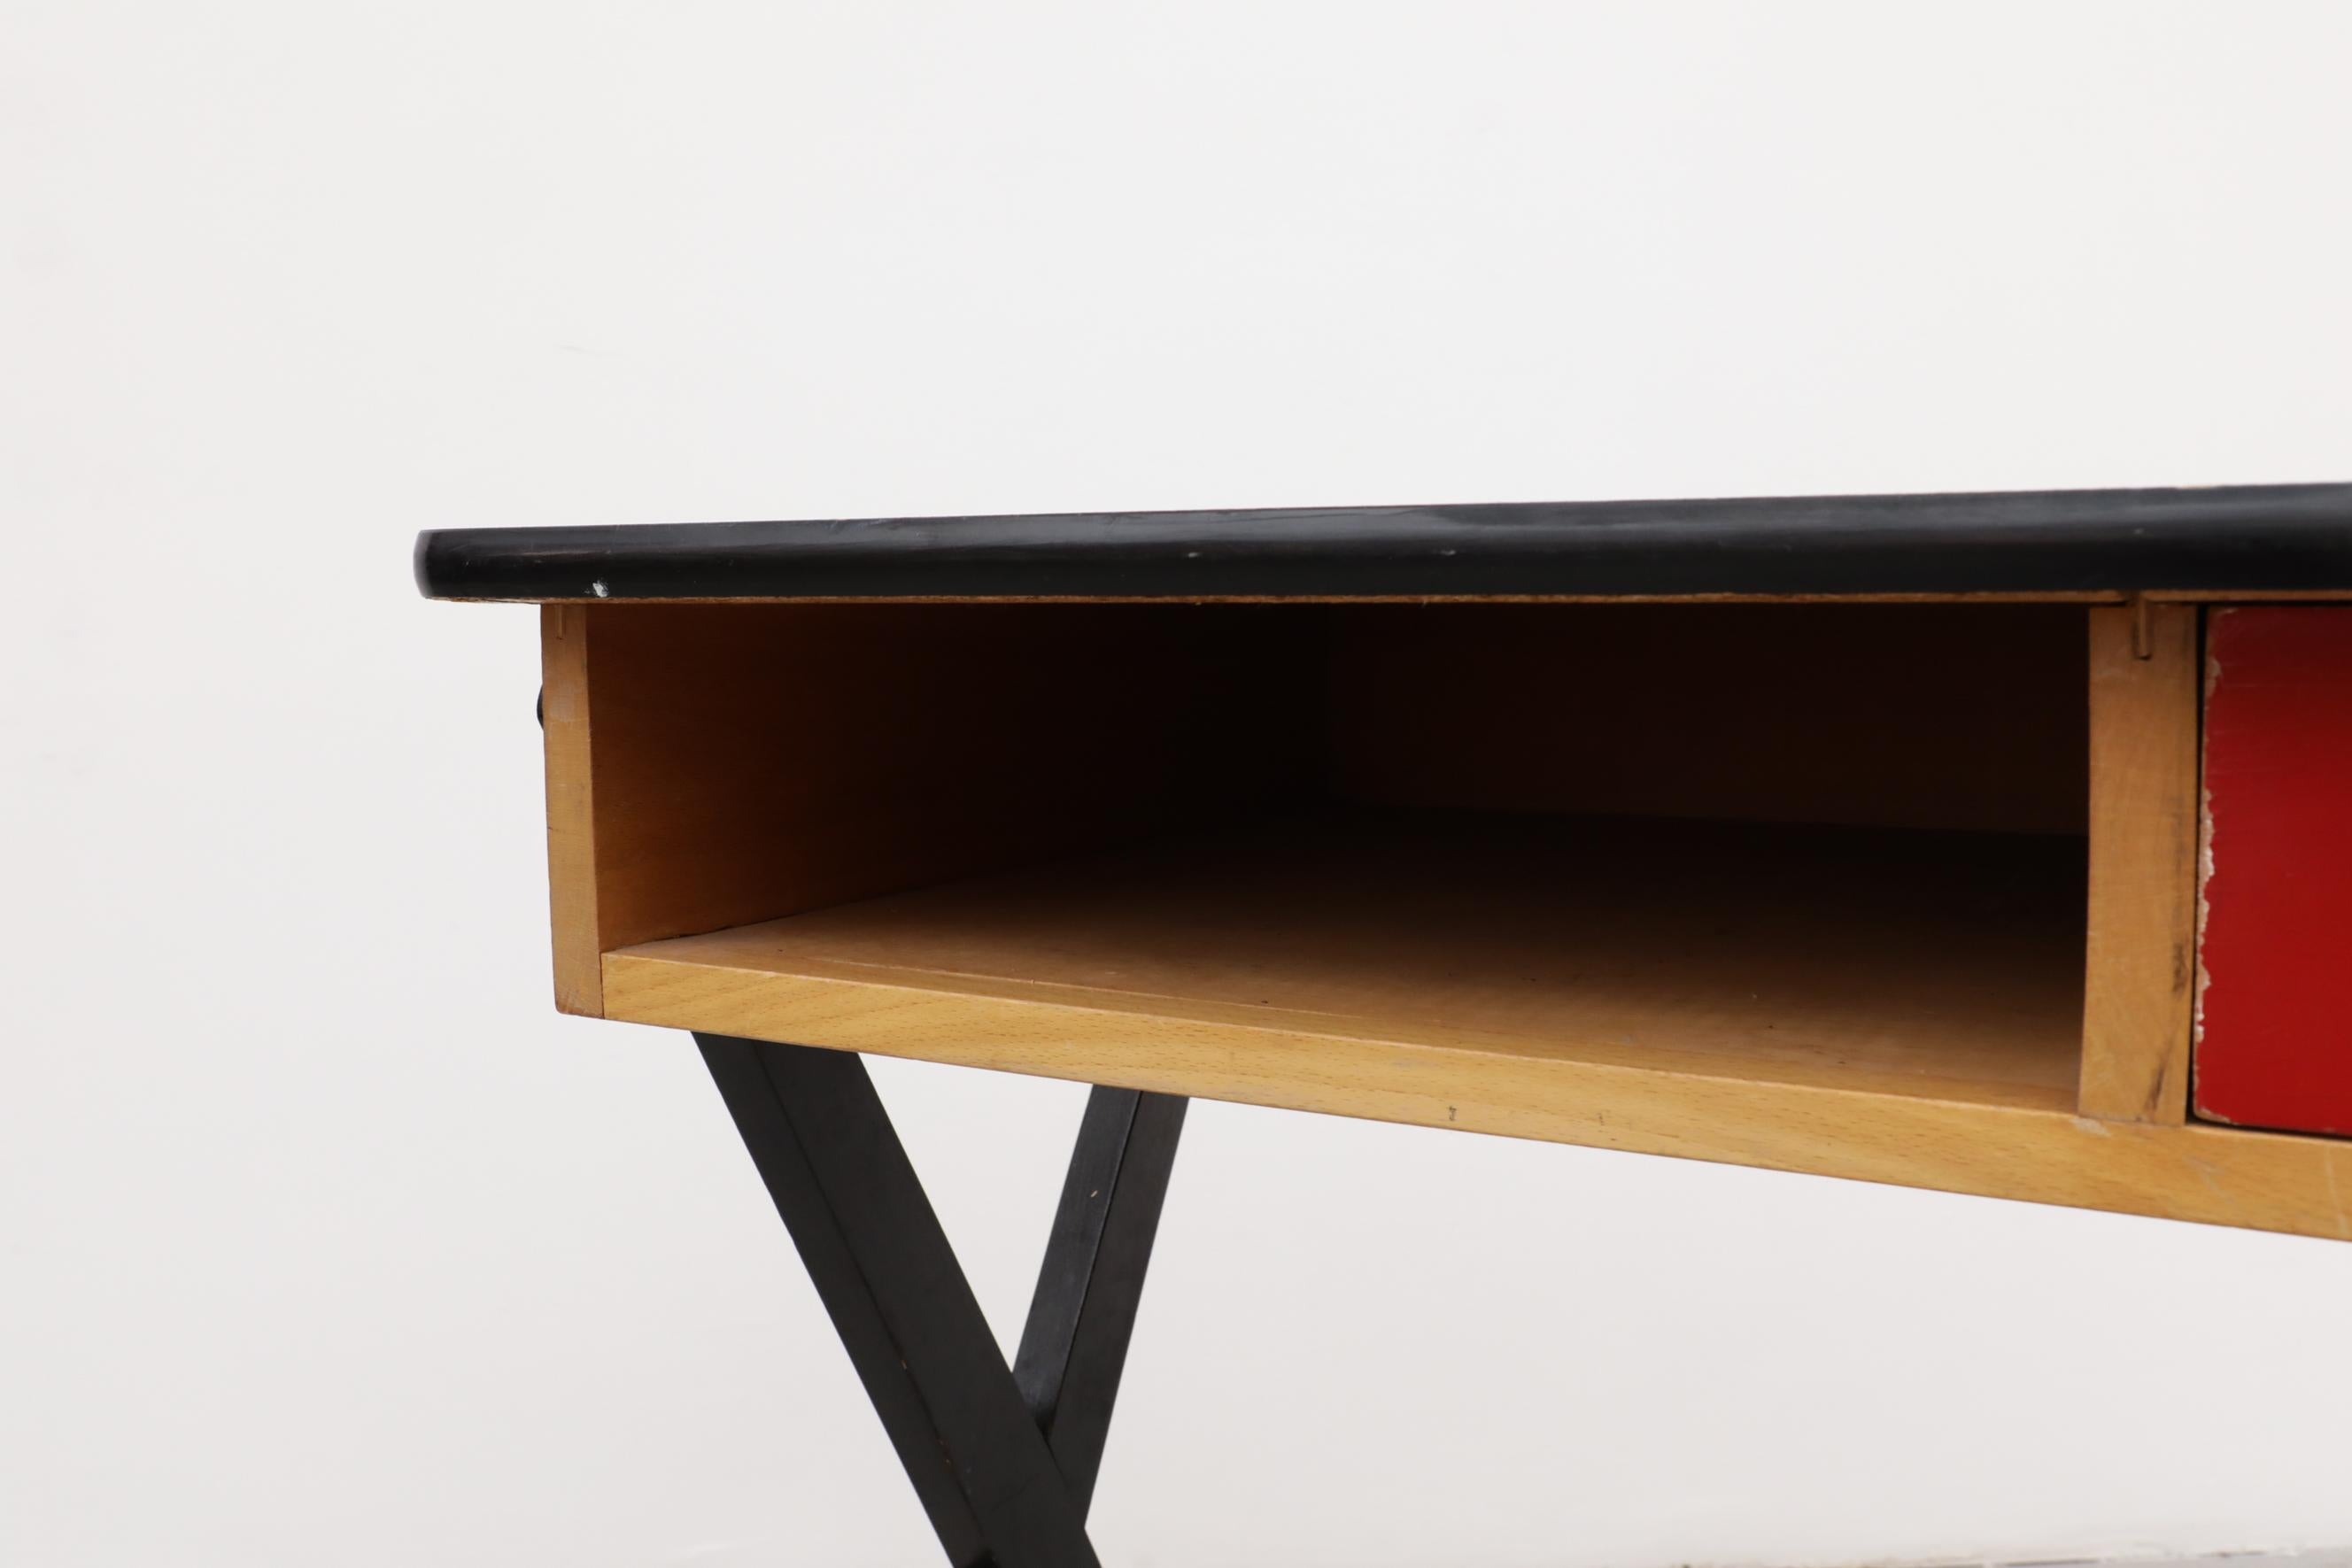 1954 Coen de Vries Desk in Birch w/ Ebony Base, Red Drawer and Formica Top For Sale 10